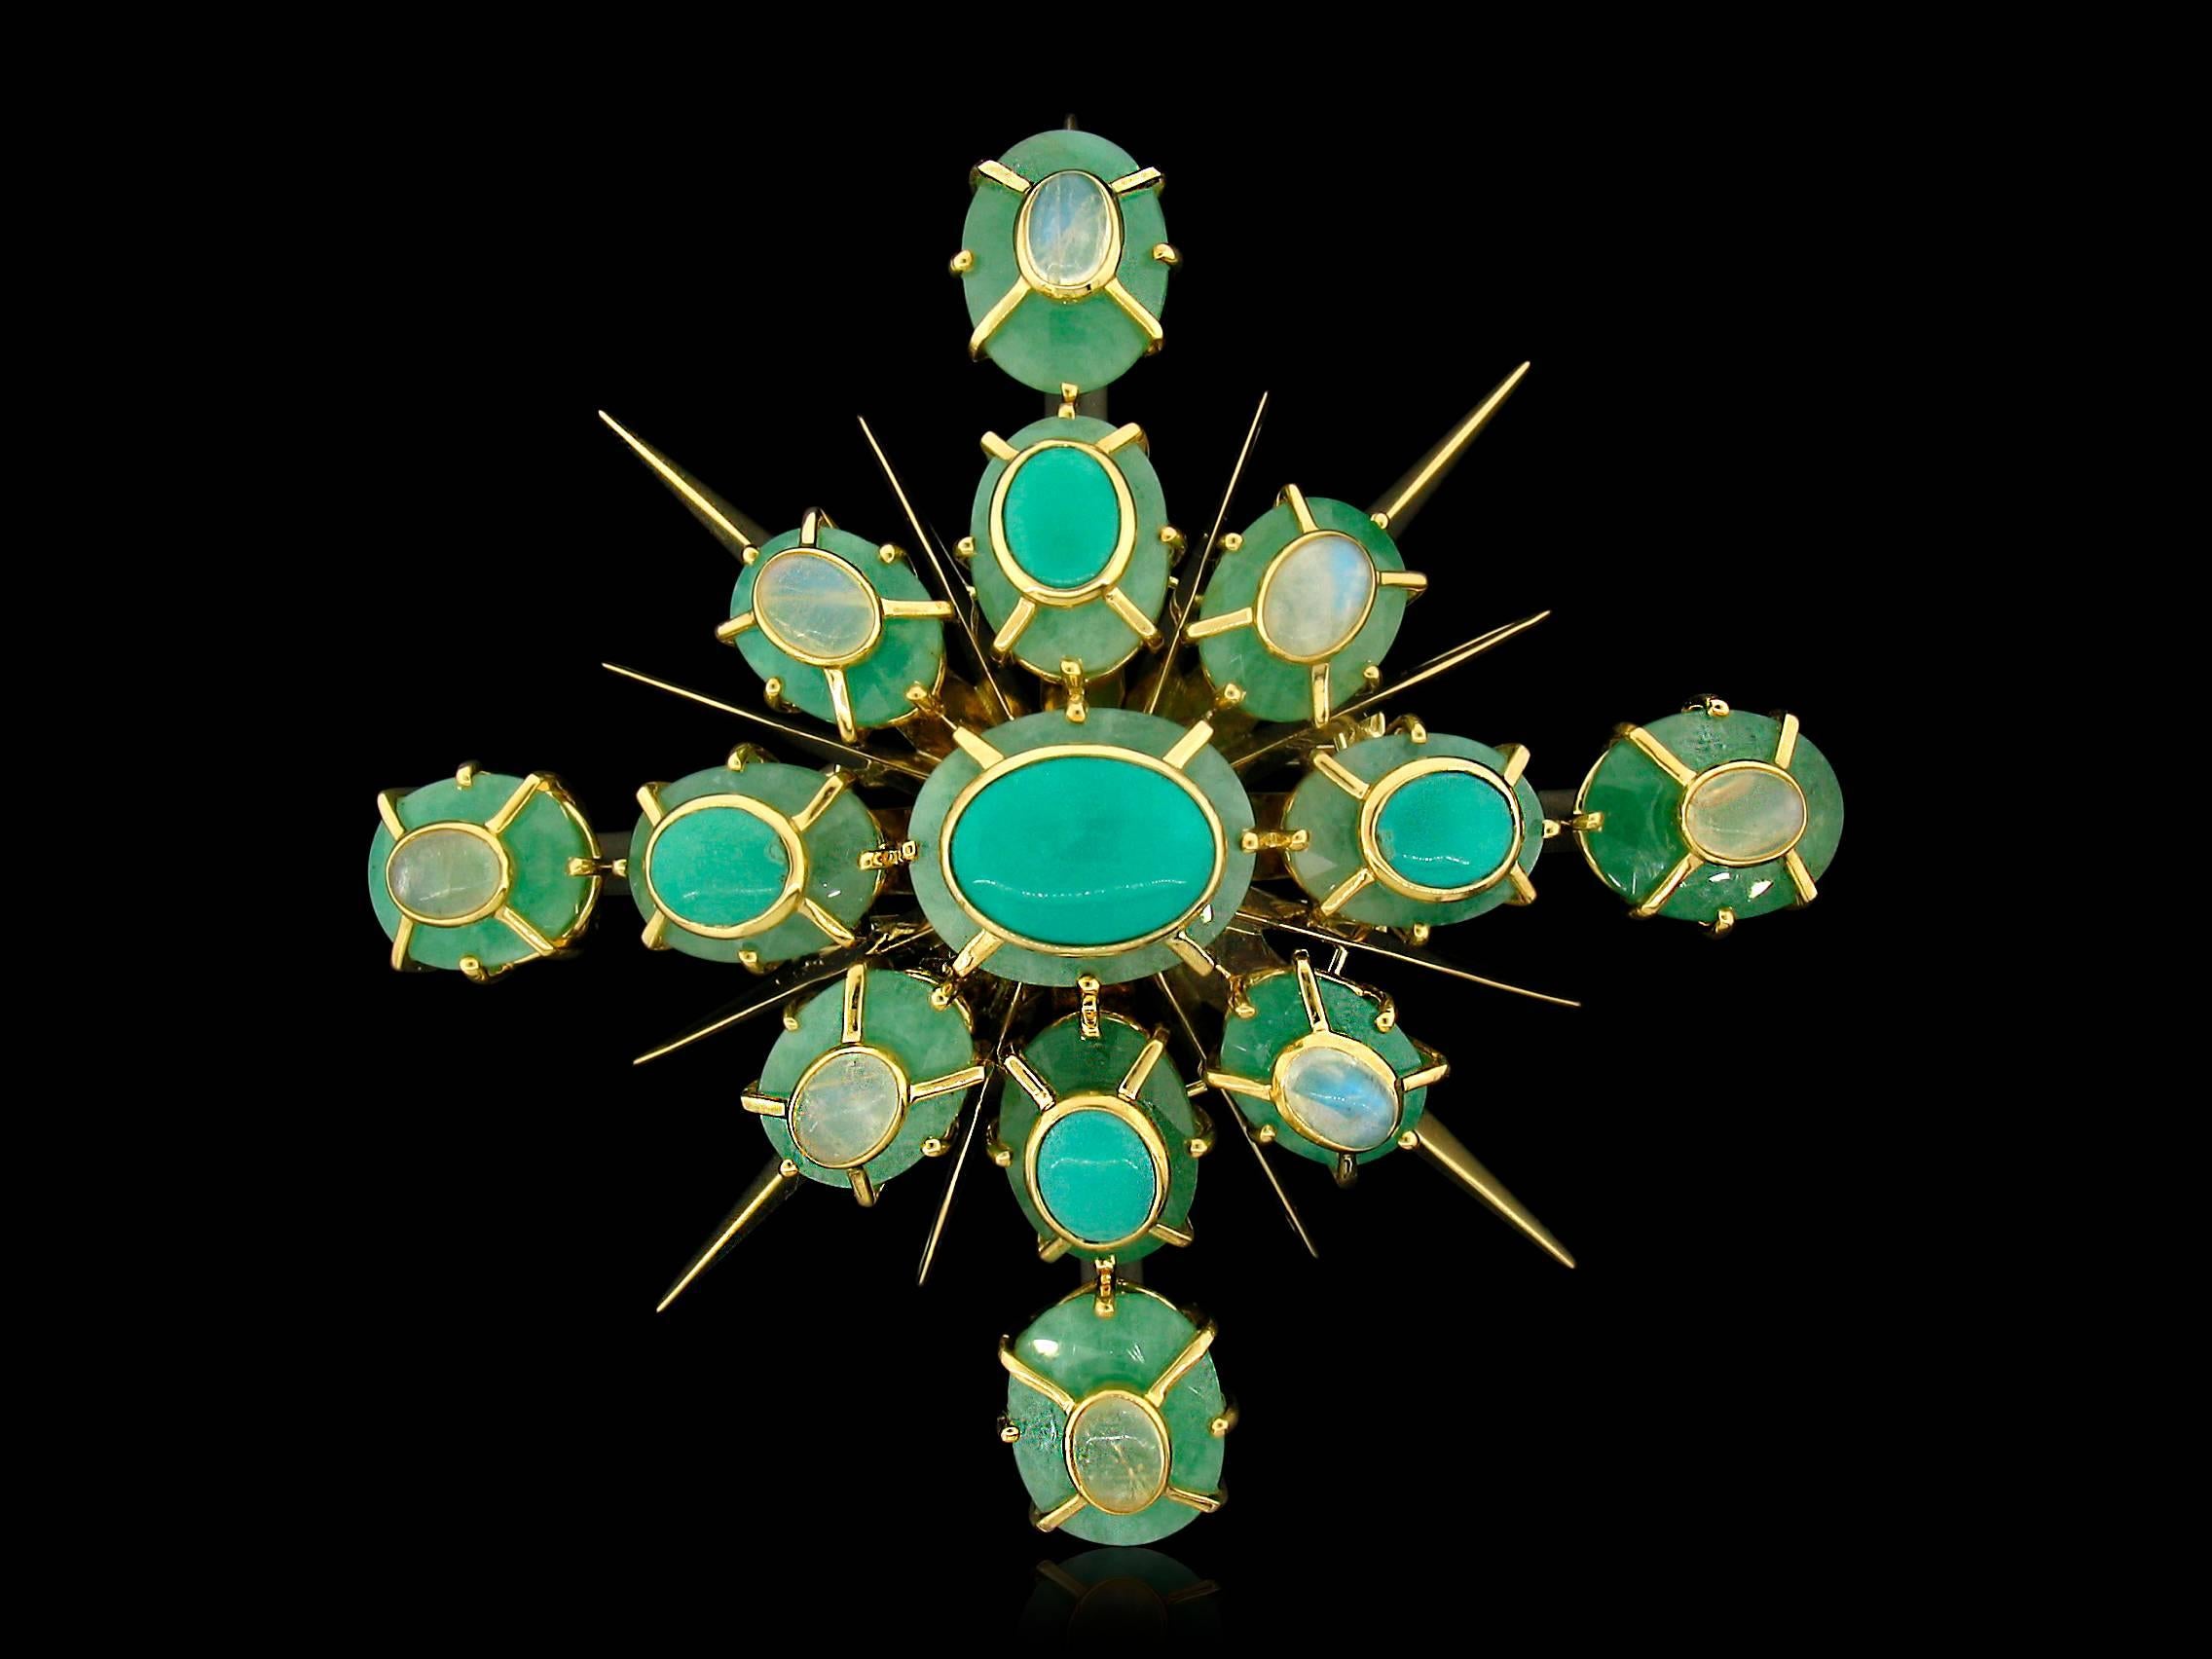 This Tony Duquette Starburst creation features oval Turquoise weighing 8.60 carats and Moonstones weighing 6.80 carats set atop Emeralds weighing a total of 98 carats. 18k yellow gold. This may be worn as a Brooch, or the pin can accommodate a chain